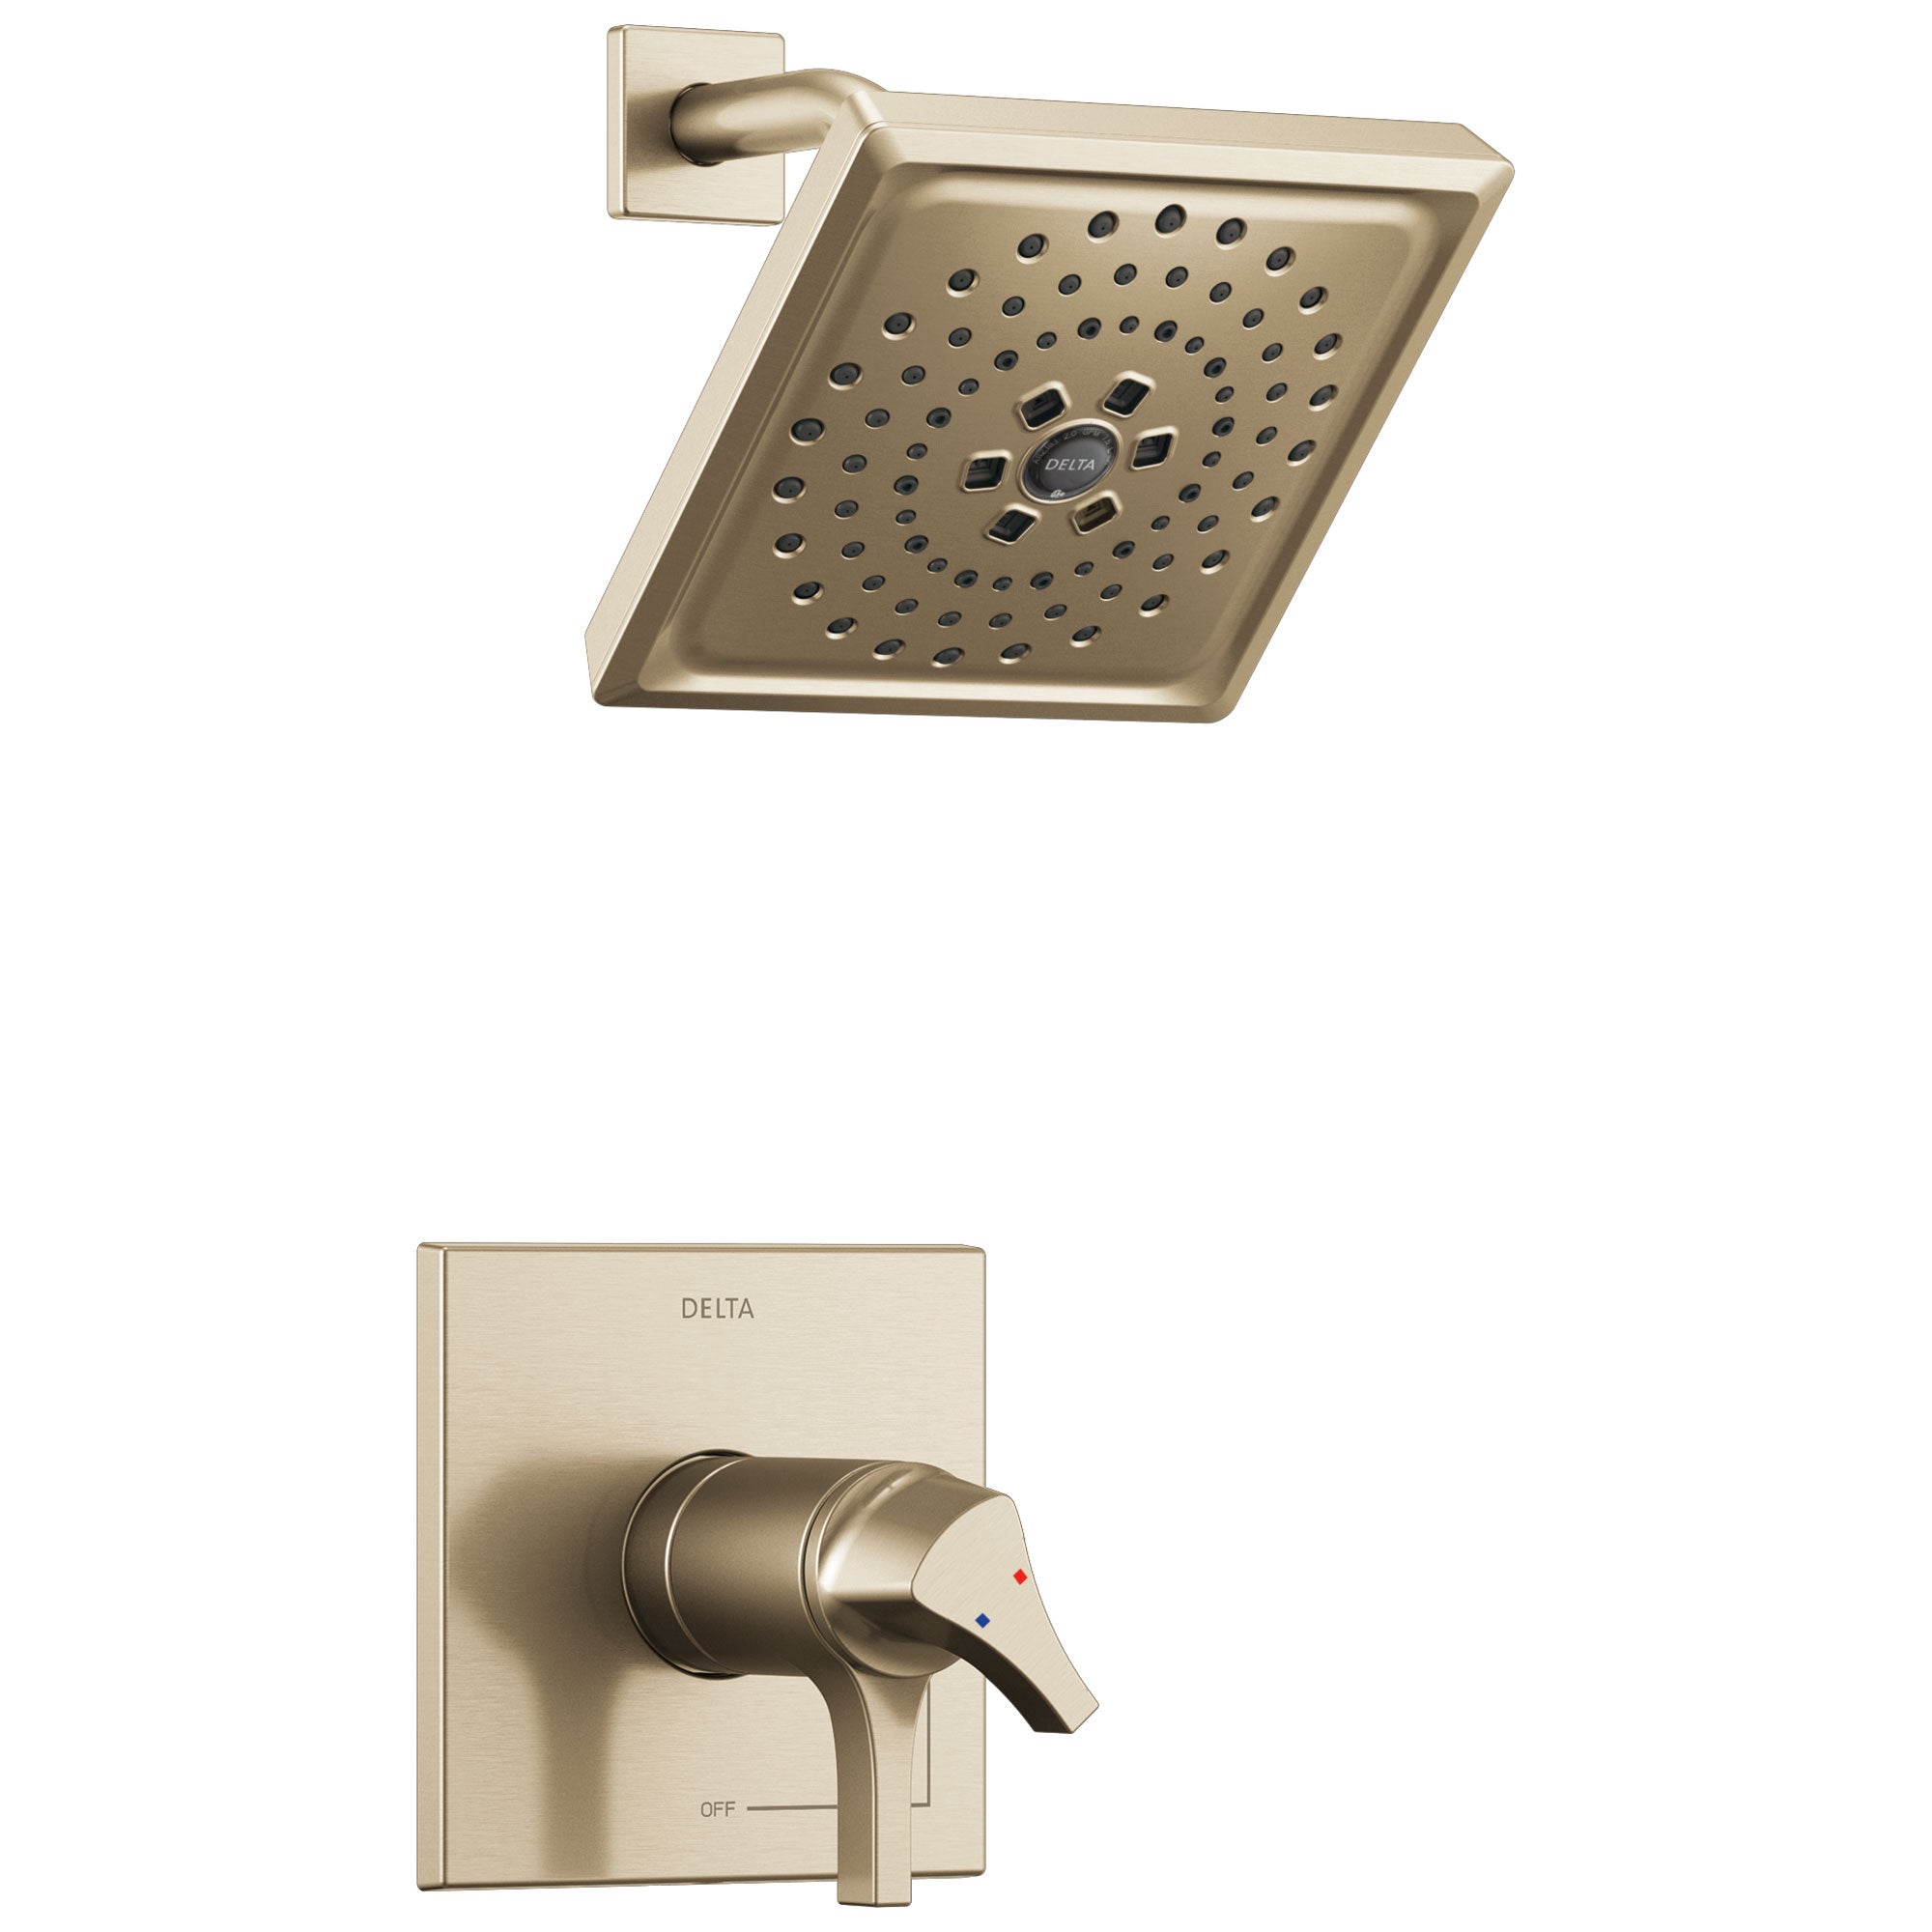 Delta Zura Champagne Bronze Finish TempAssure 17T Series Shower only Faucet Includes Handles, Cartridge, and Rough-in Valve with Stops D3001V